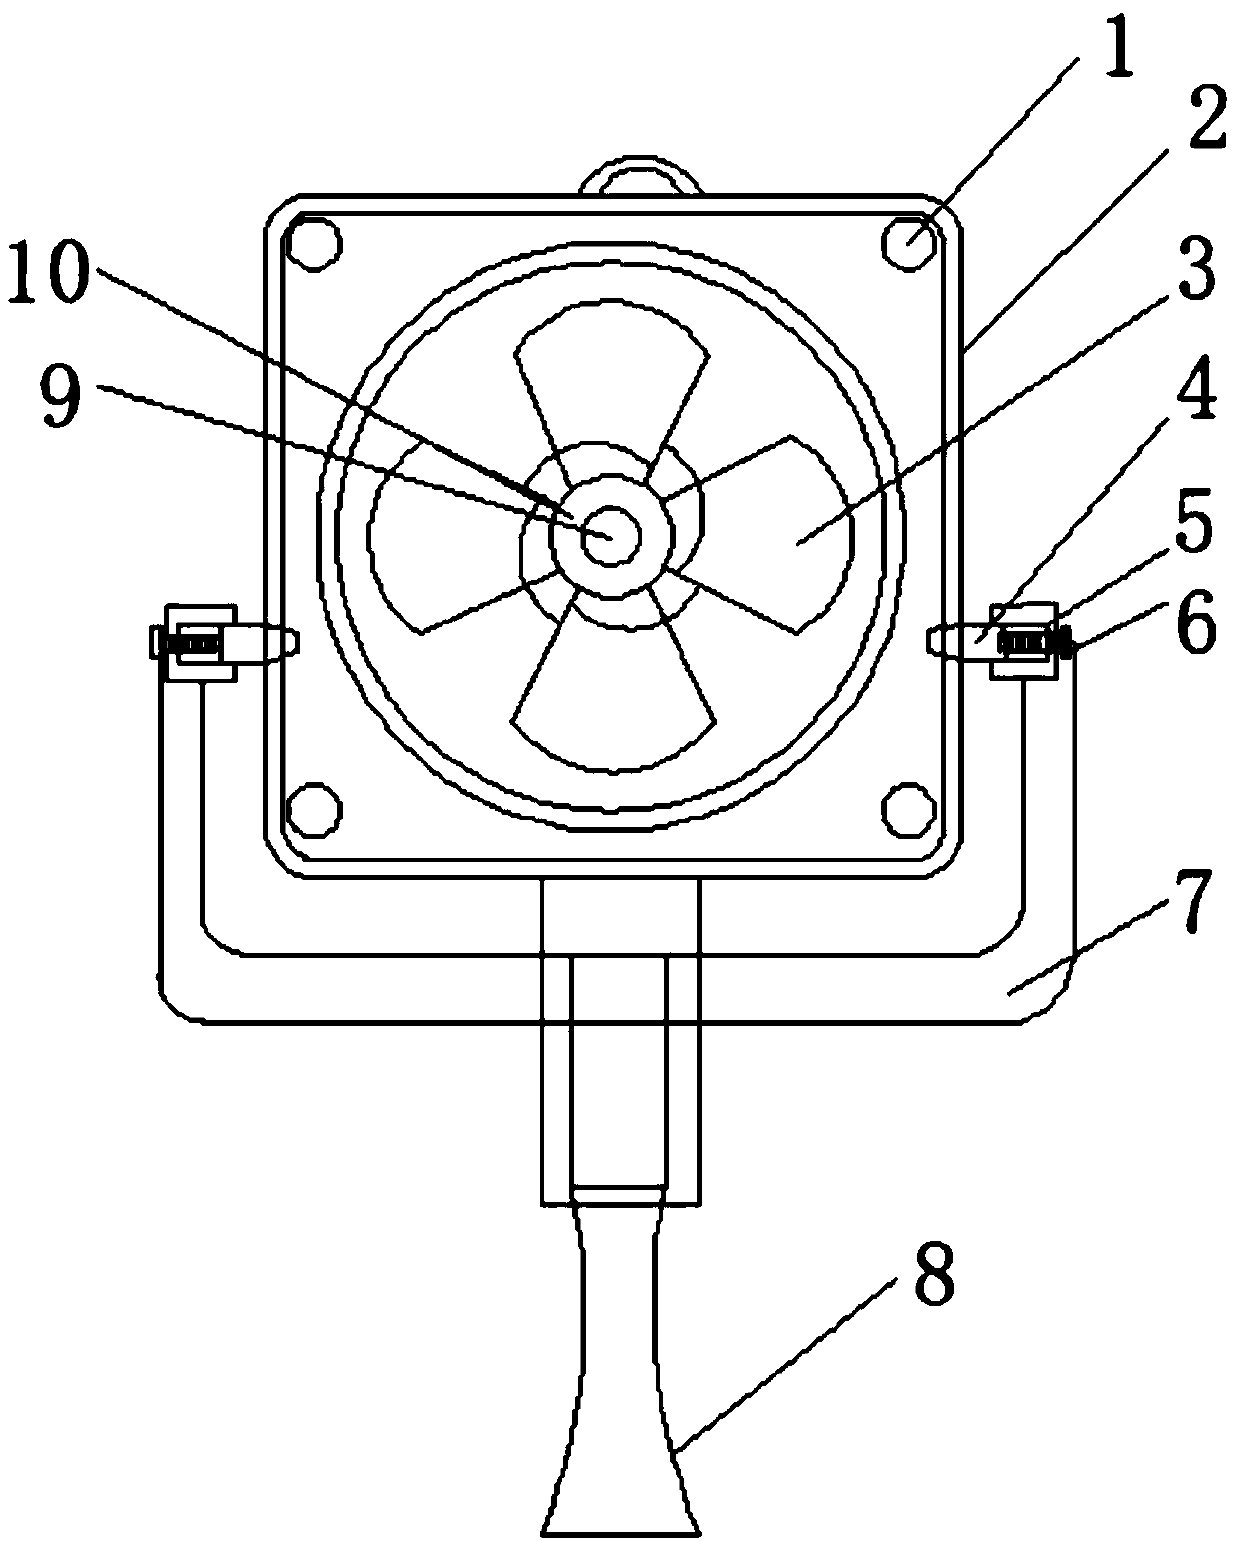 Portable fan with adjustable vertical angle